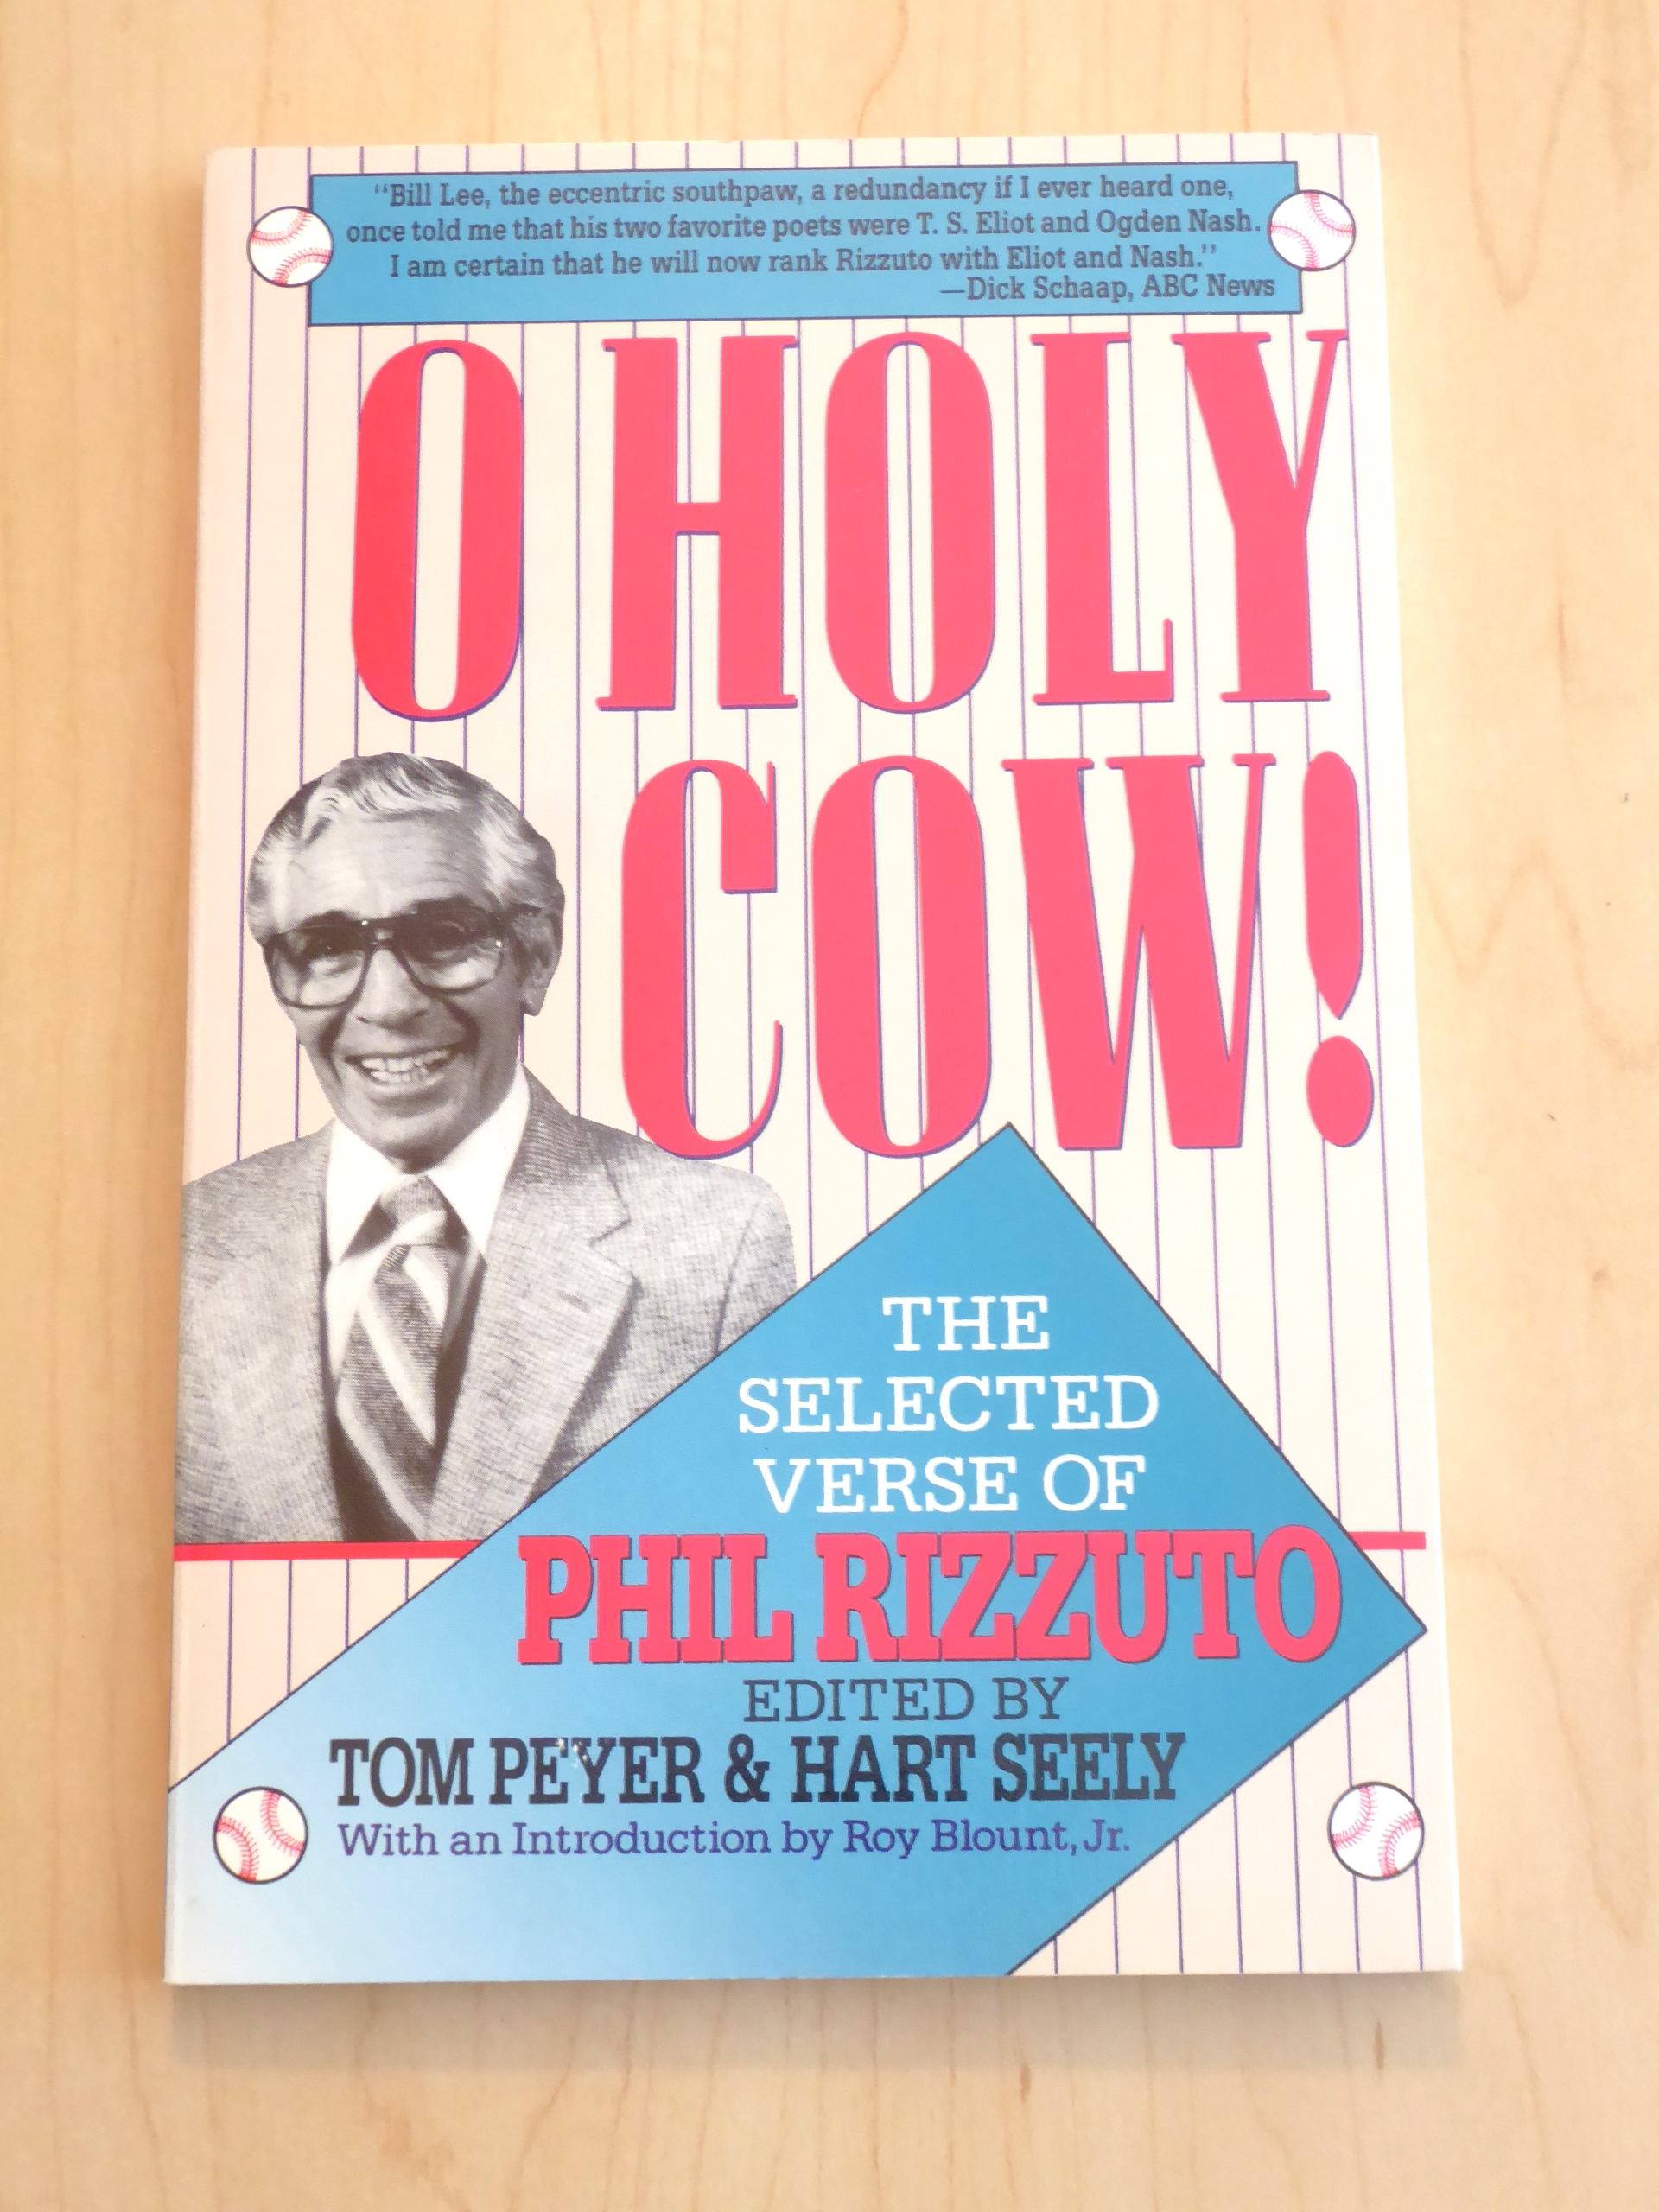 O Holy Cow!: The Selected Verse of Phil Rizzuto by Rizzuto, Phil; Peyer,  Tom; Seely, Hart: New Soft cover (1993) 1st Edition.